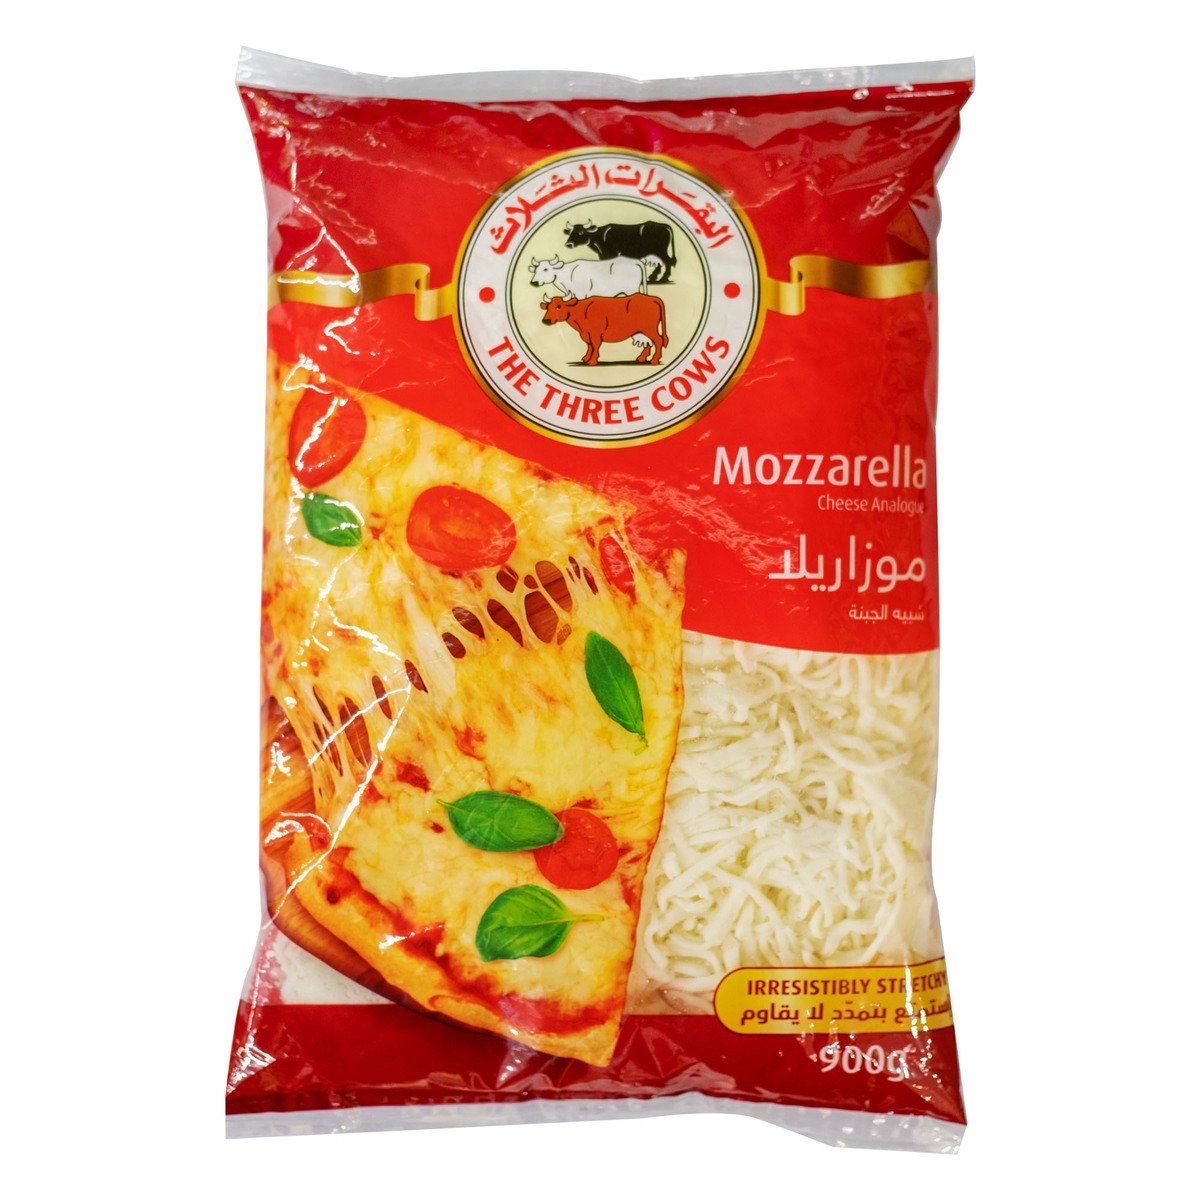 Buy The Three Cows Mozzarella Cheese 900 g Online at Best Price | Grated Cheese | Lulu KSA in Saudi Arabia